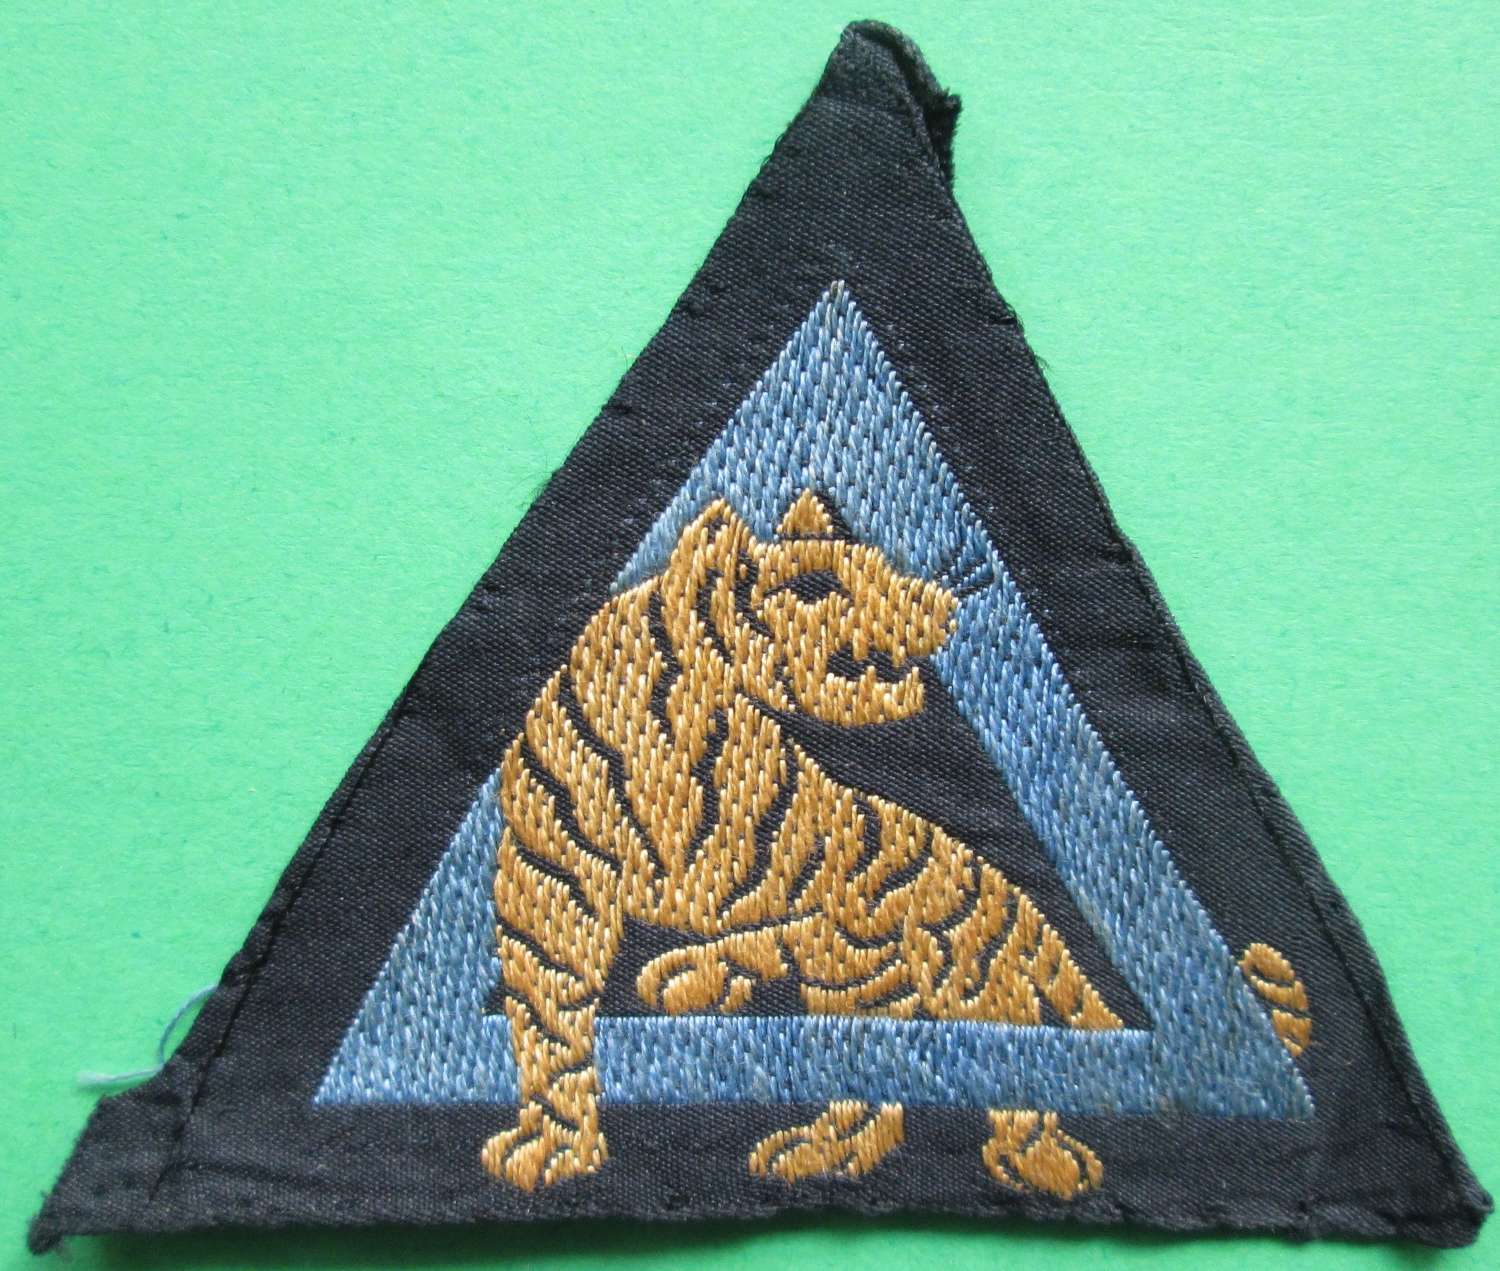 A 26TH INDIAN DIVISION FORMATION SIGN